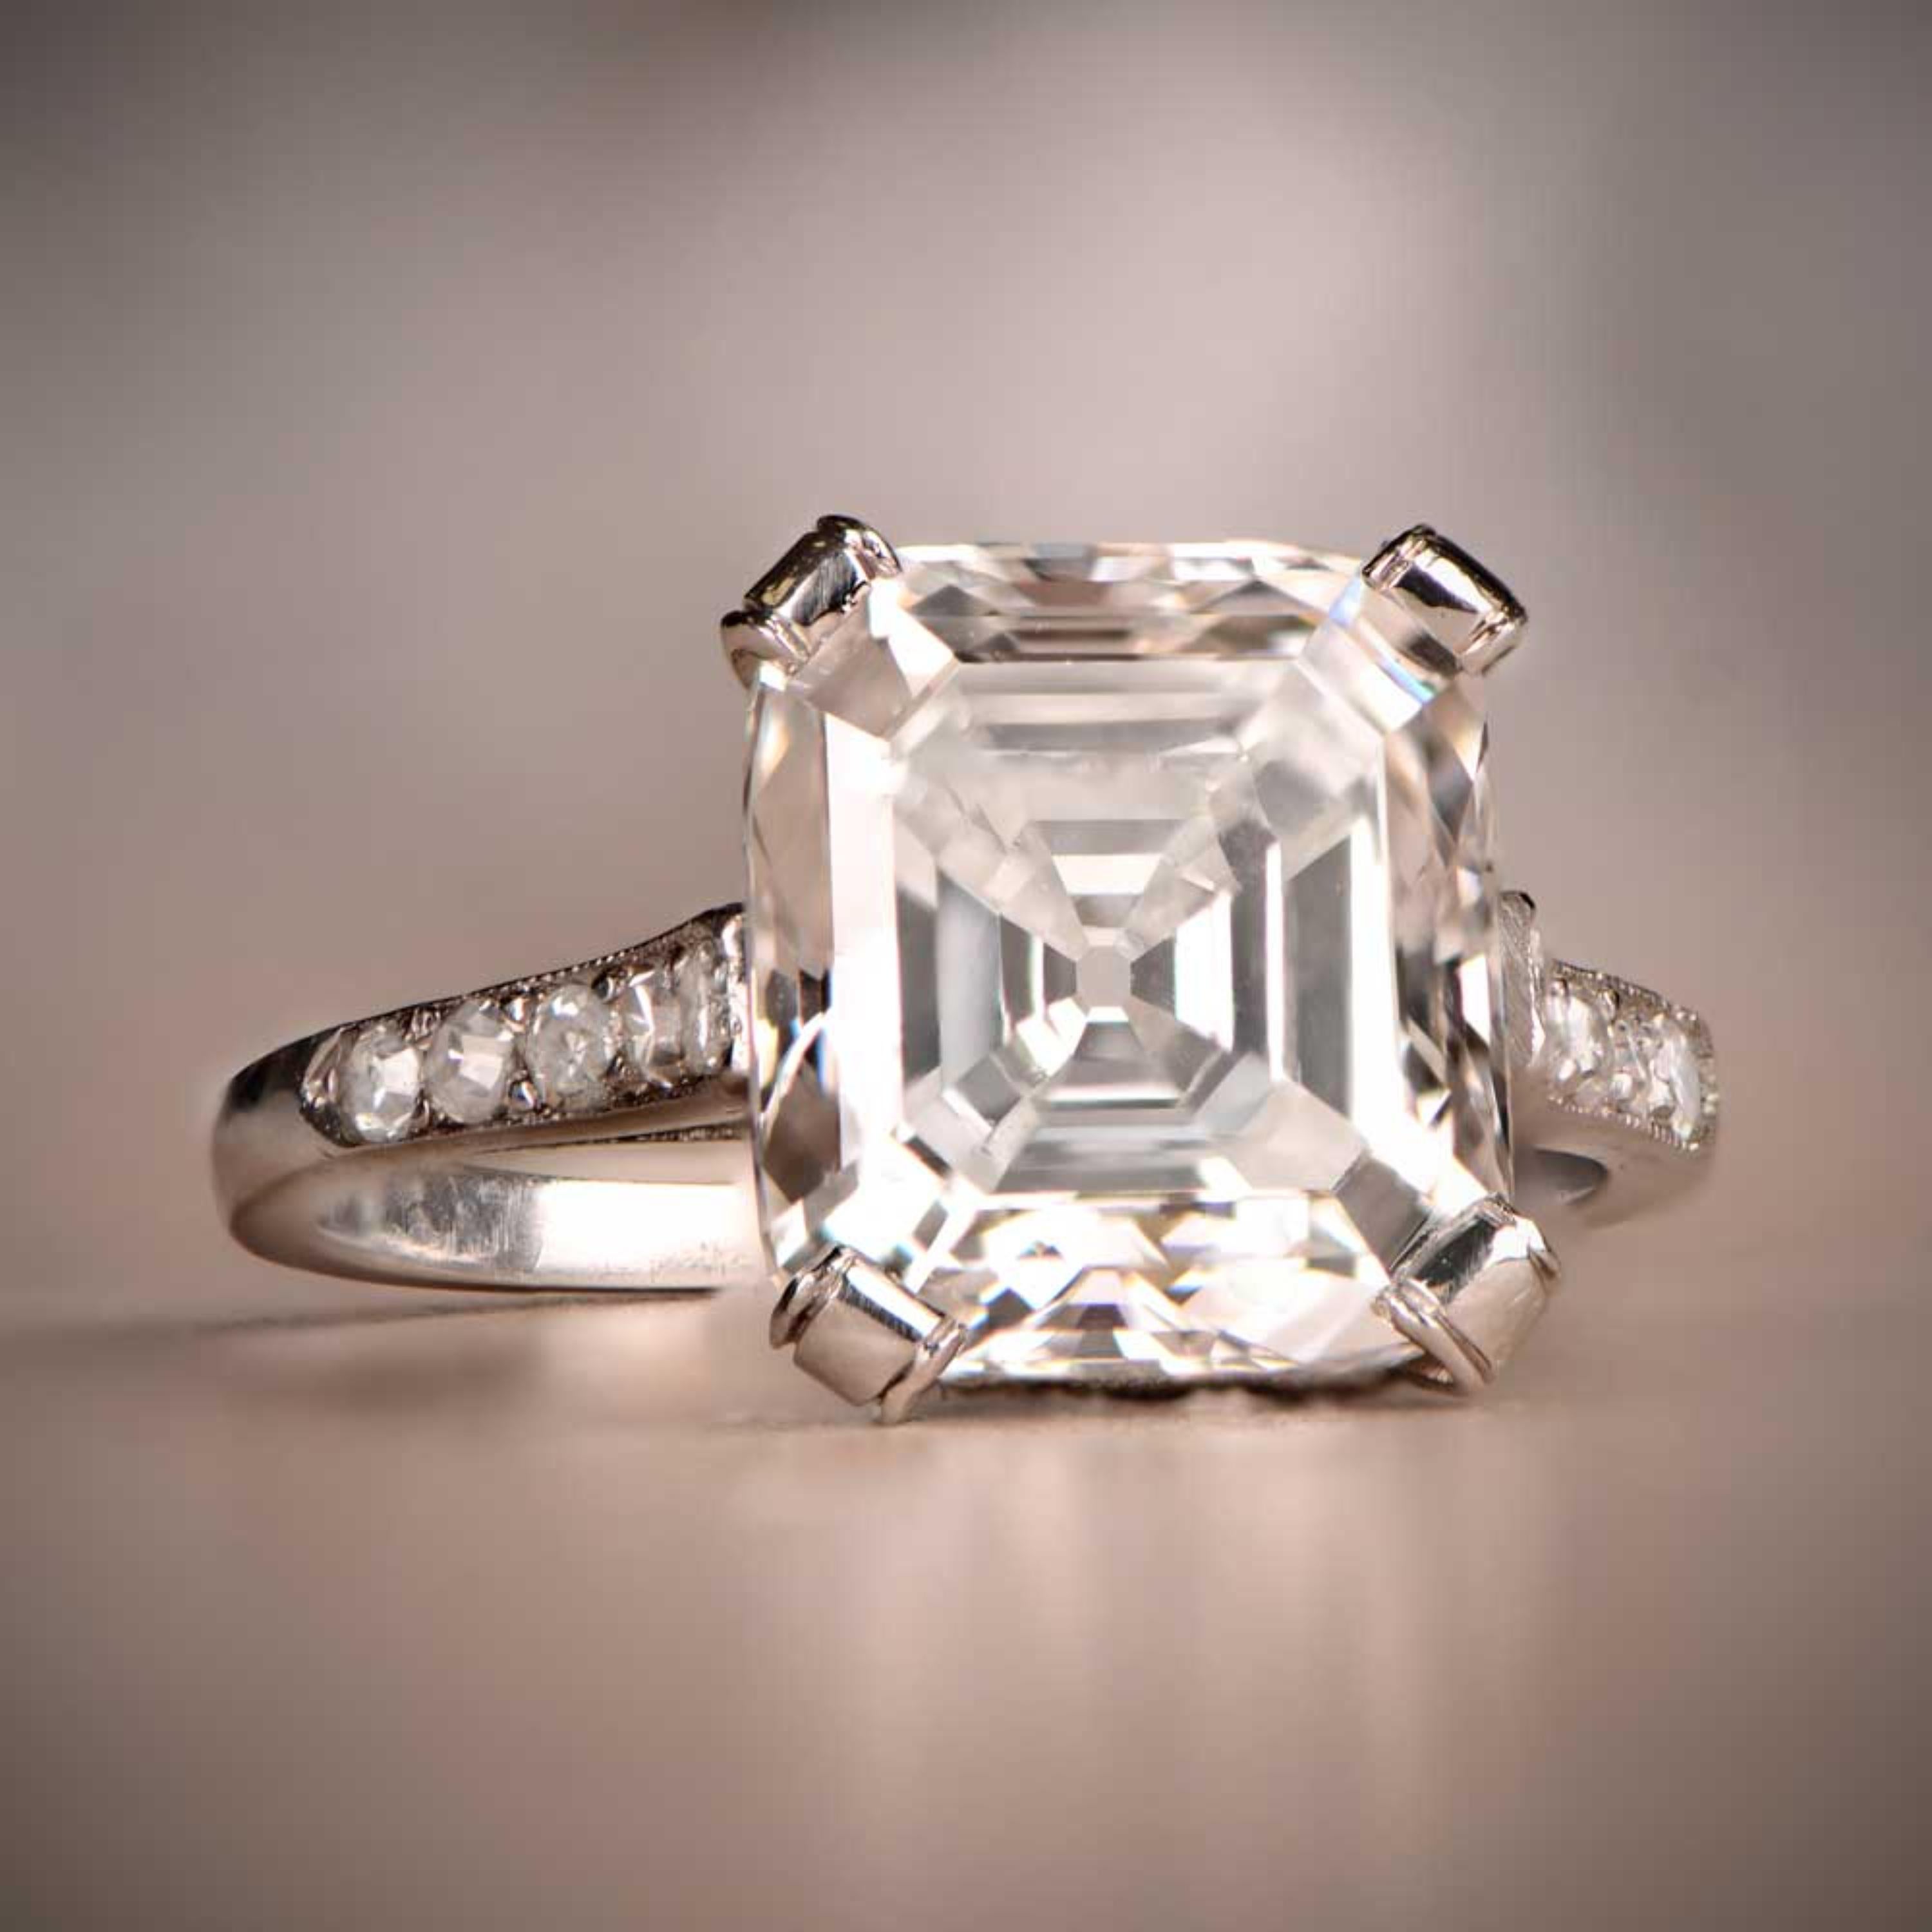 GIA Certified Rare 4.01 CT Square Emerald Cut Natural Diamond Ring in Platinum

A Copy of the GIA Certificate is Available Upon Request.

A stunning ring featuring IGI/GIA Certified 4.01 Carat Natural Diamond VS1 and 0.08 Carat of Diamond Accents